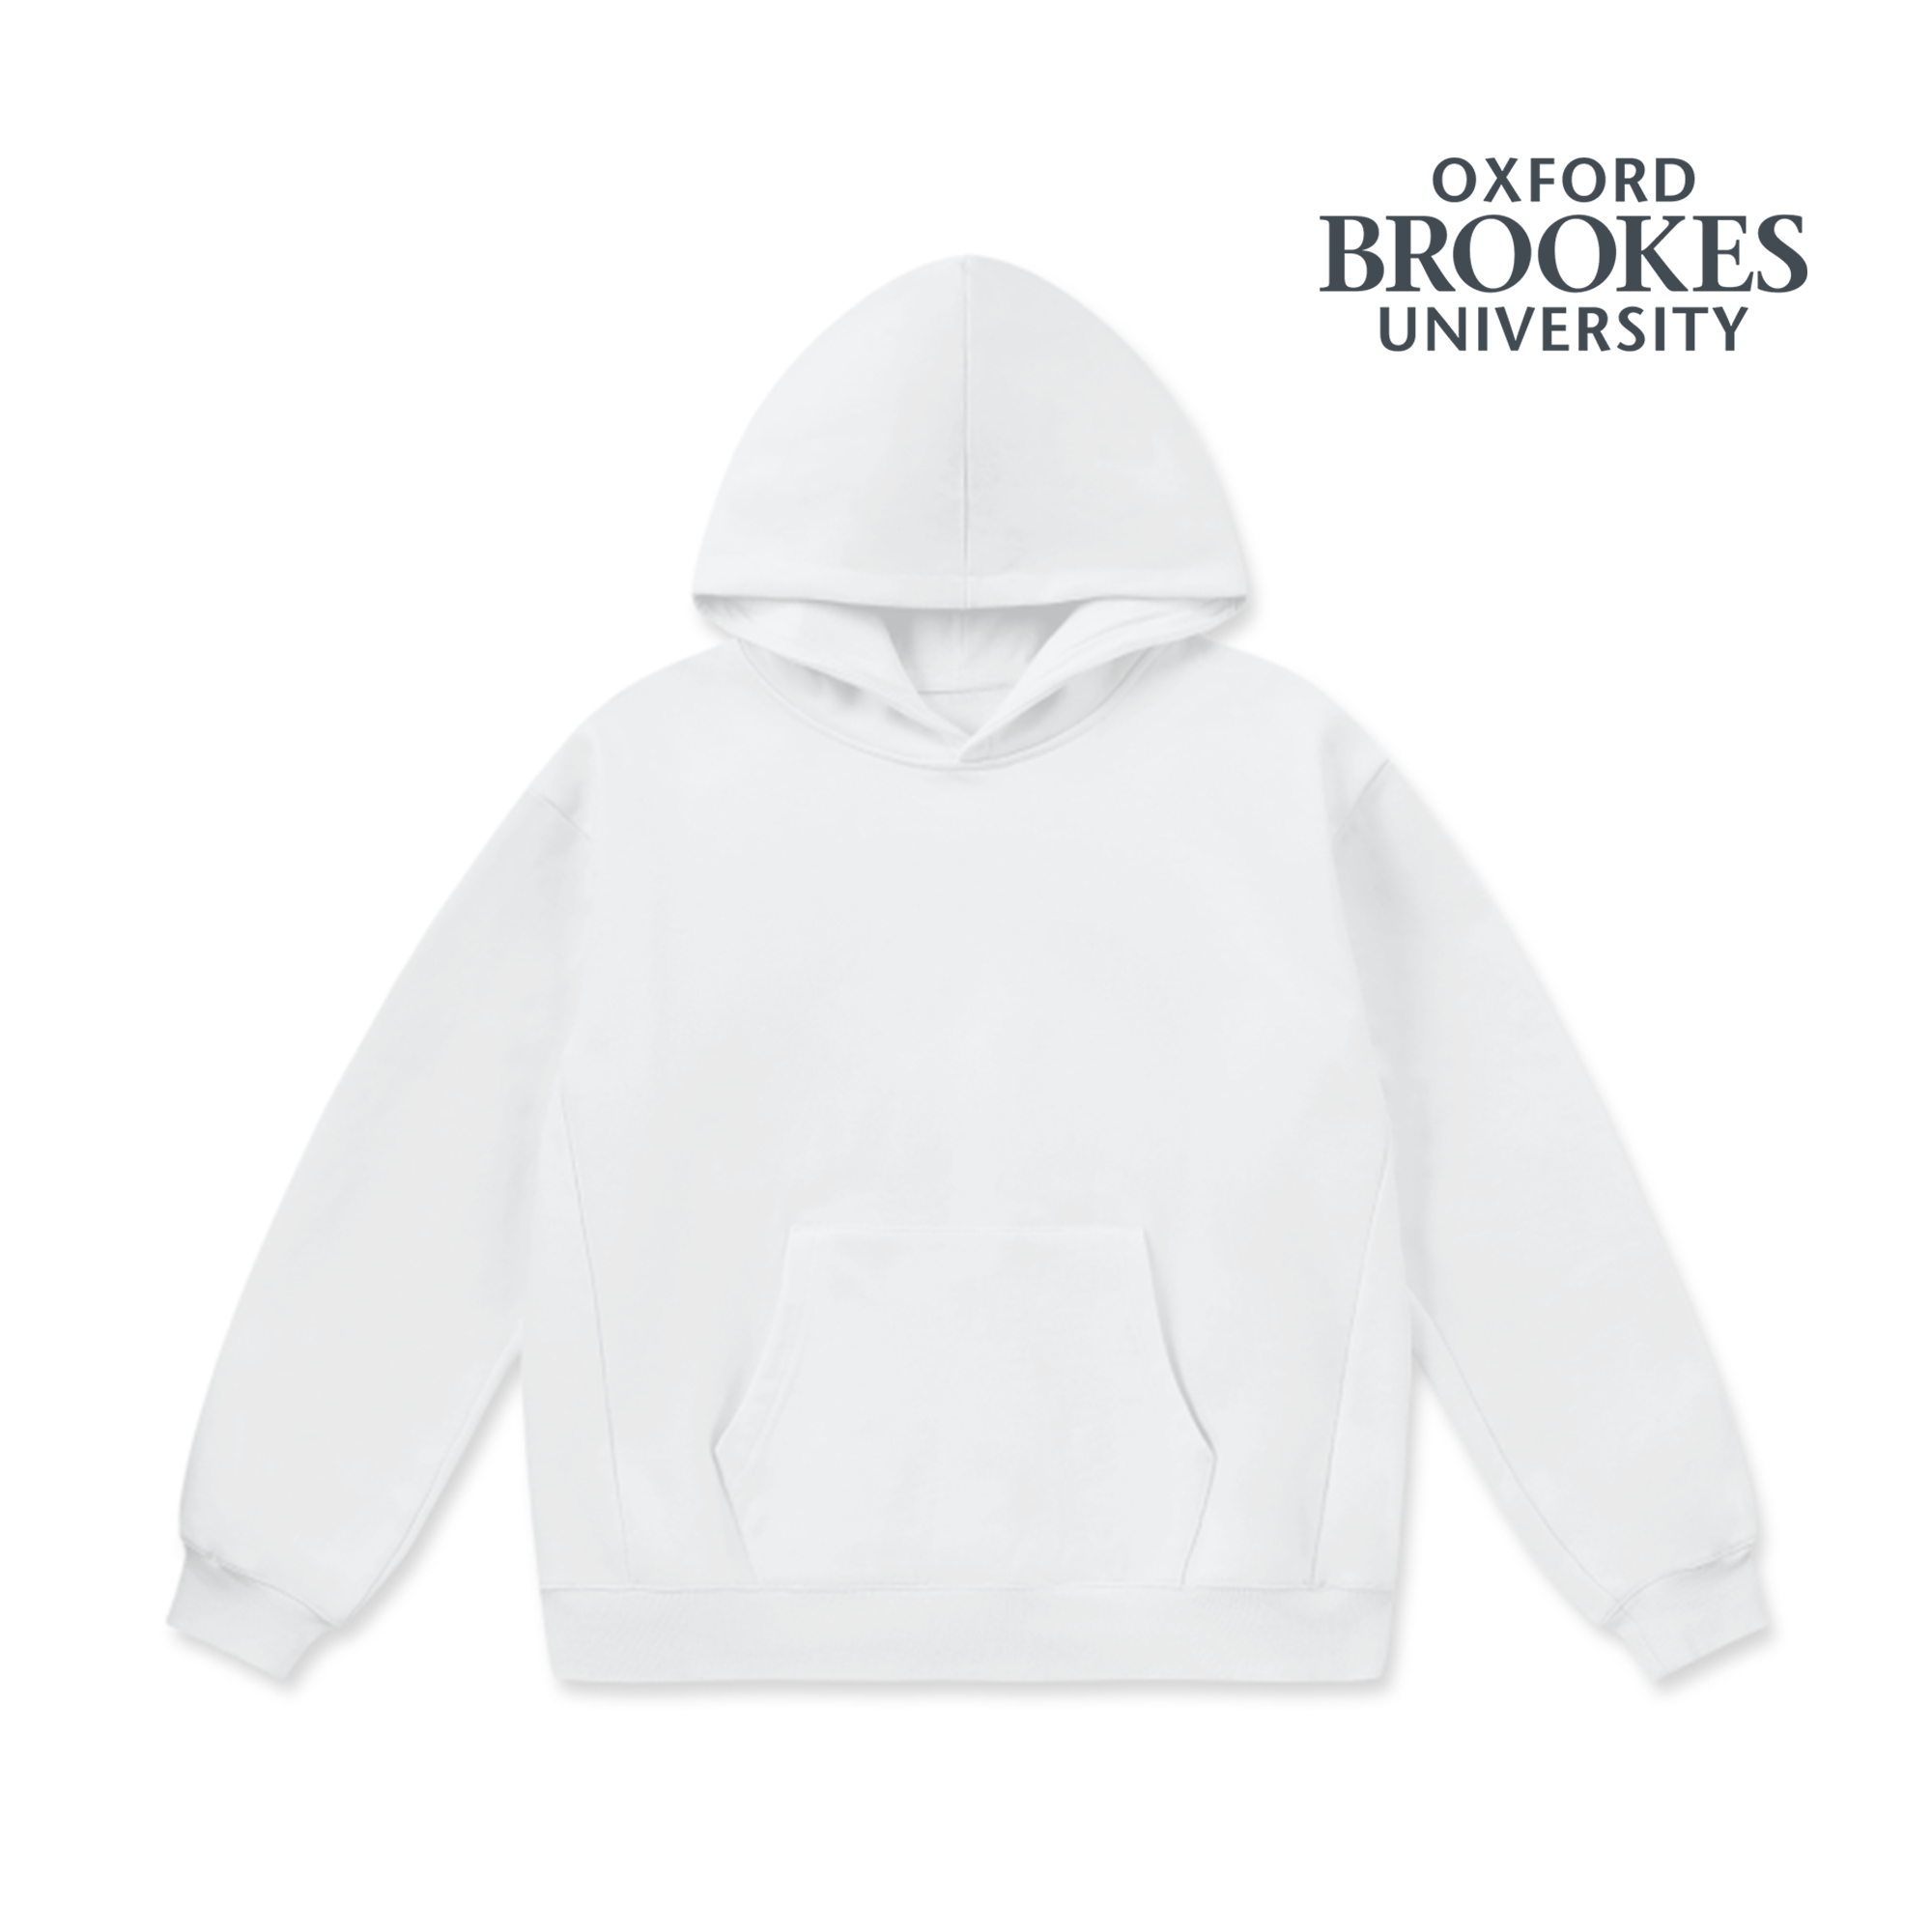 LCC Super Weighted Hoodie - Oxford Brookes University (Modern)